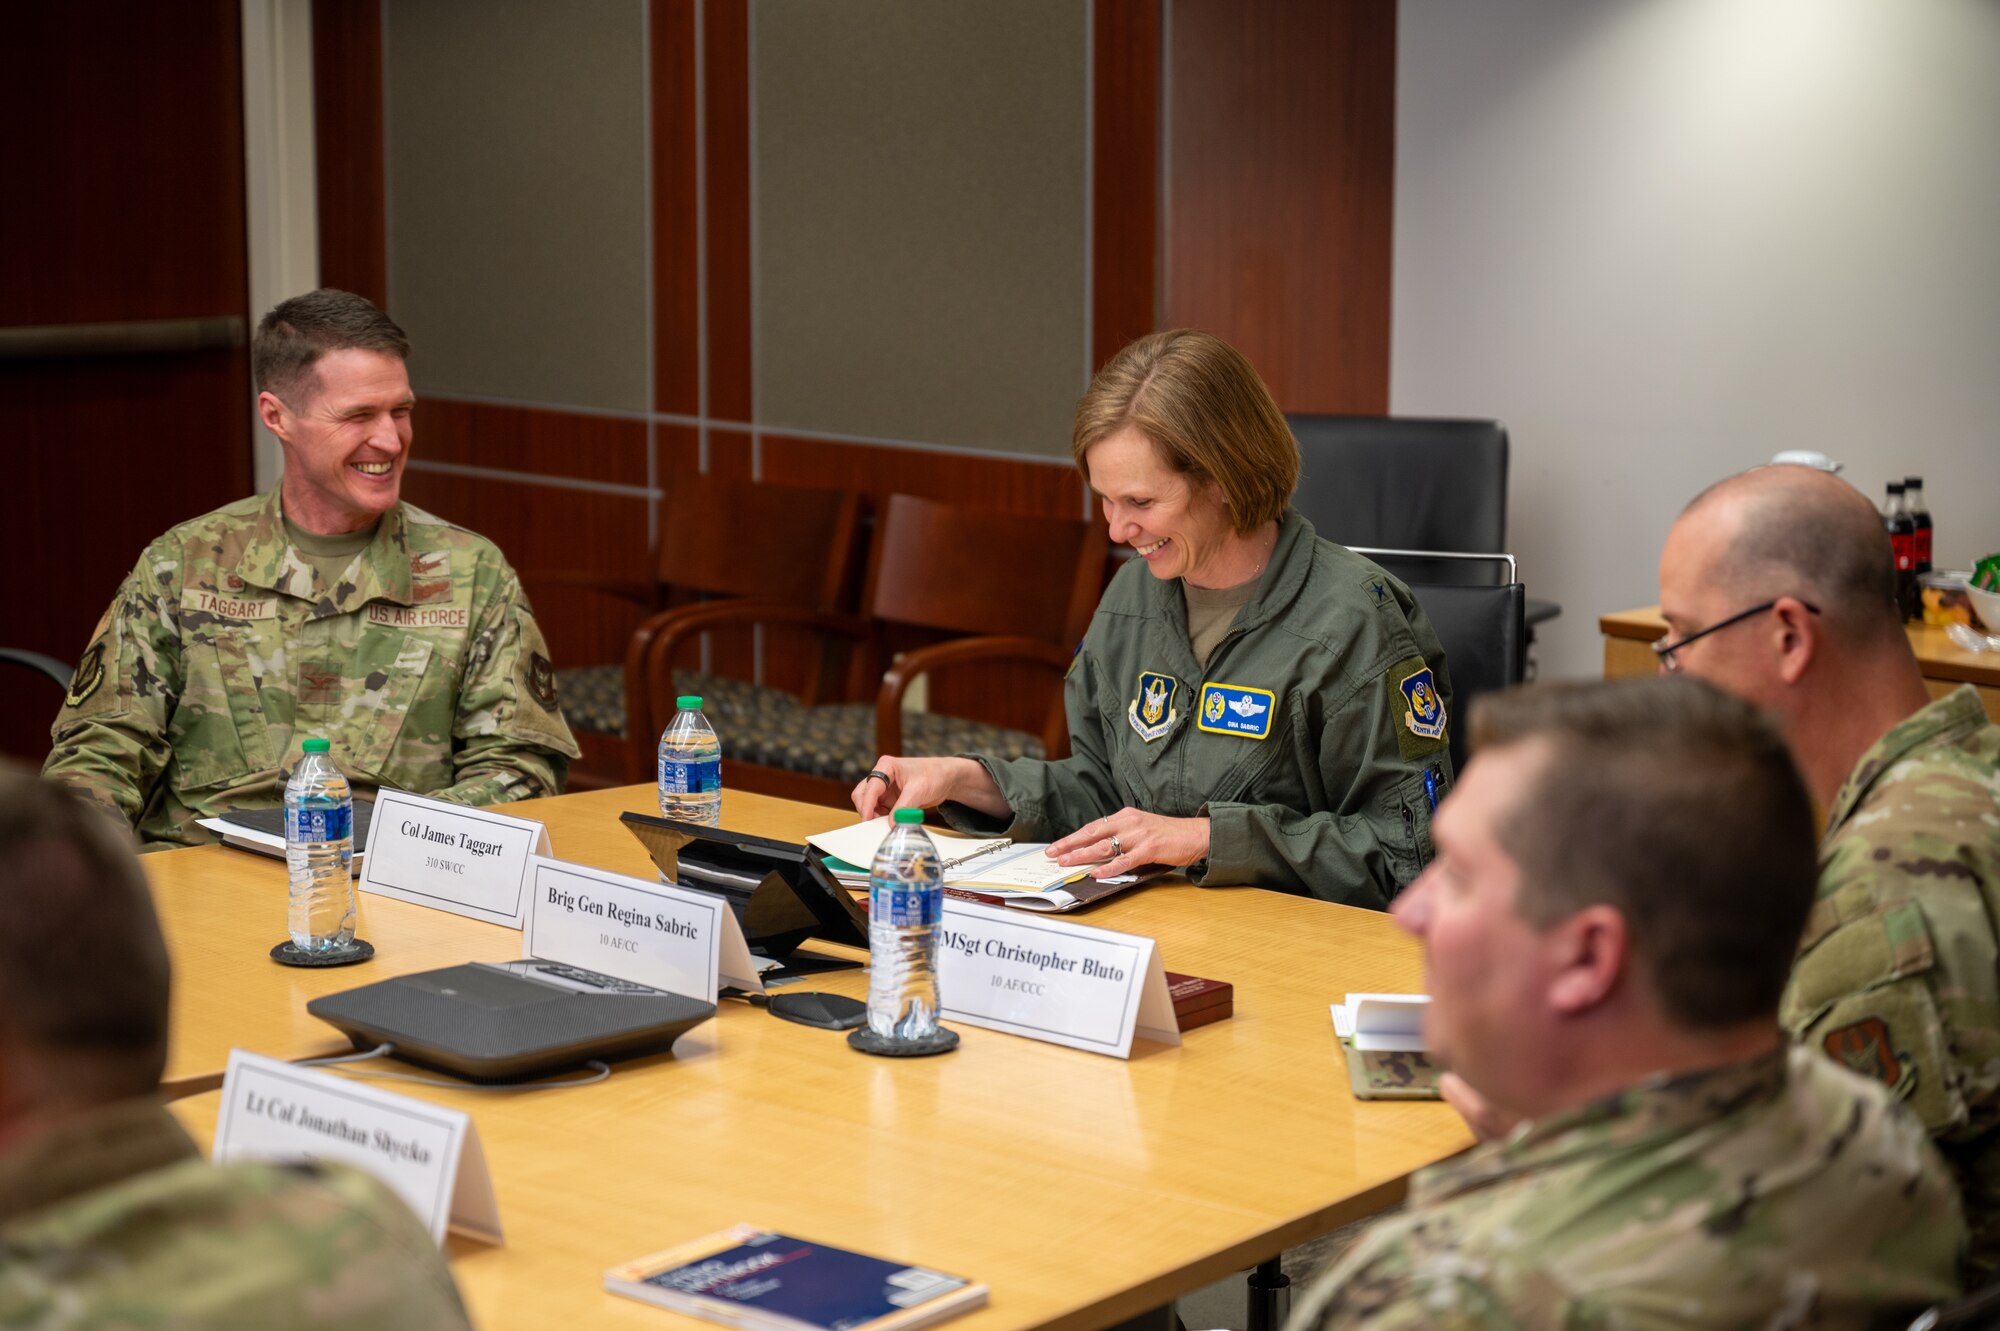 People in U.S. Air Force uniforms sitting at a table.